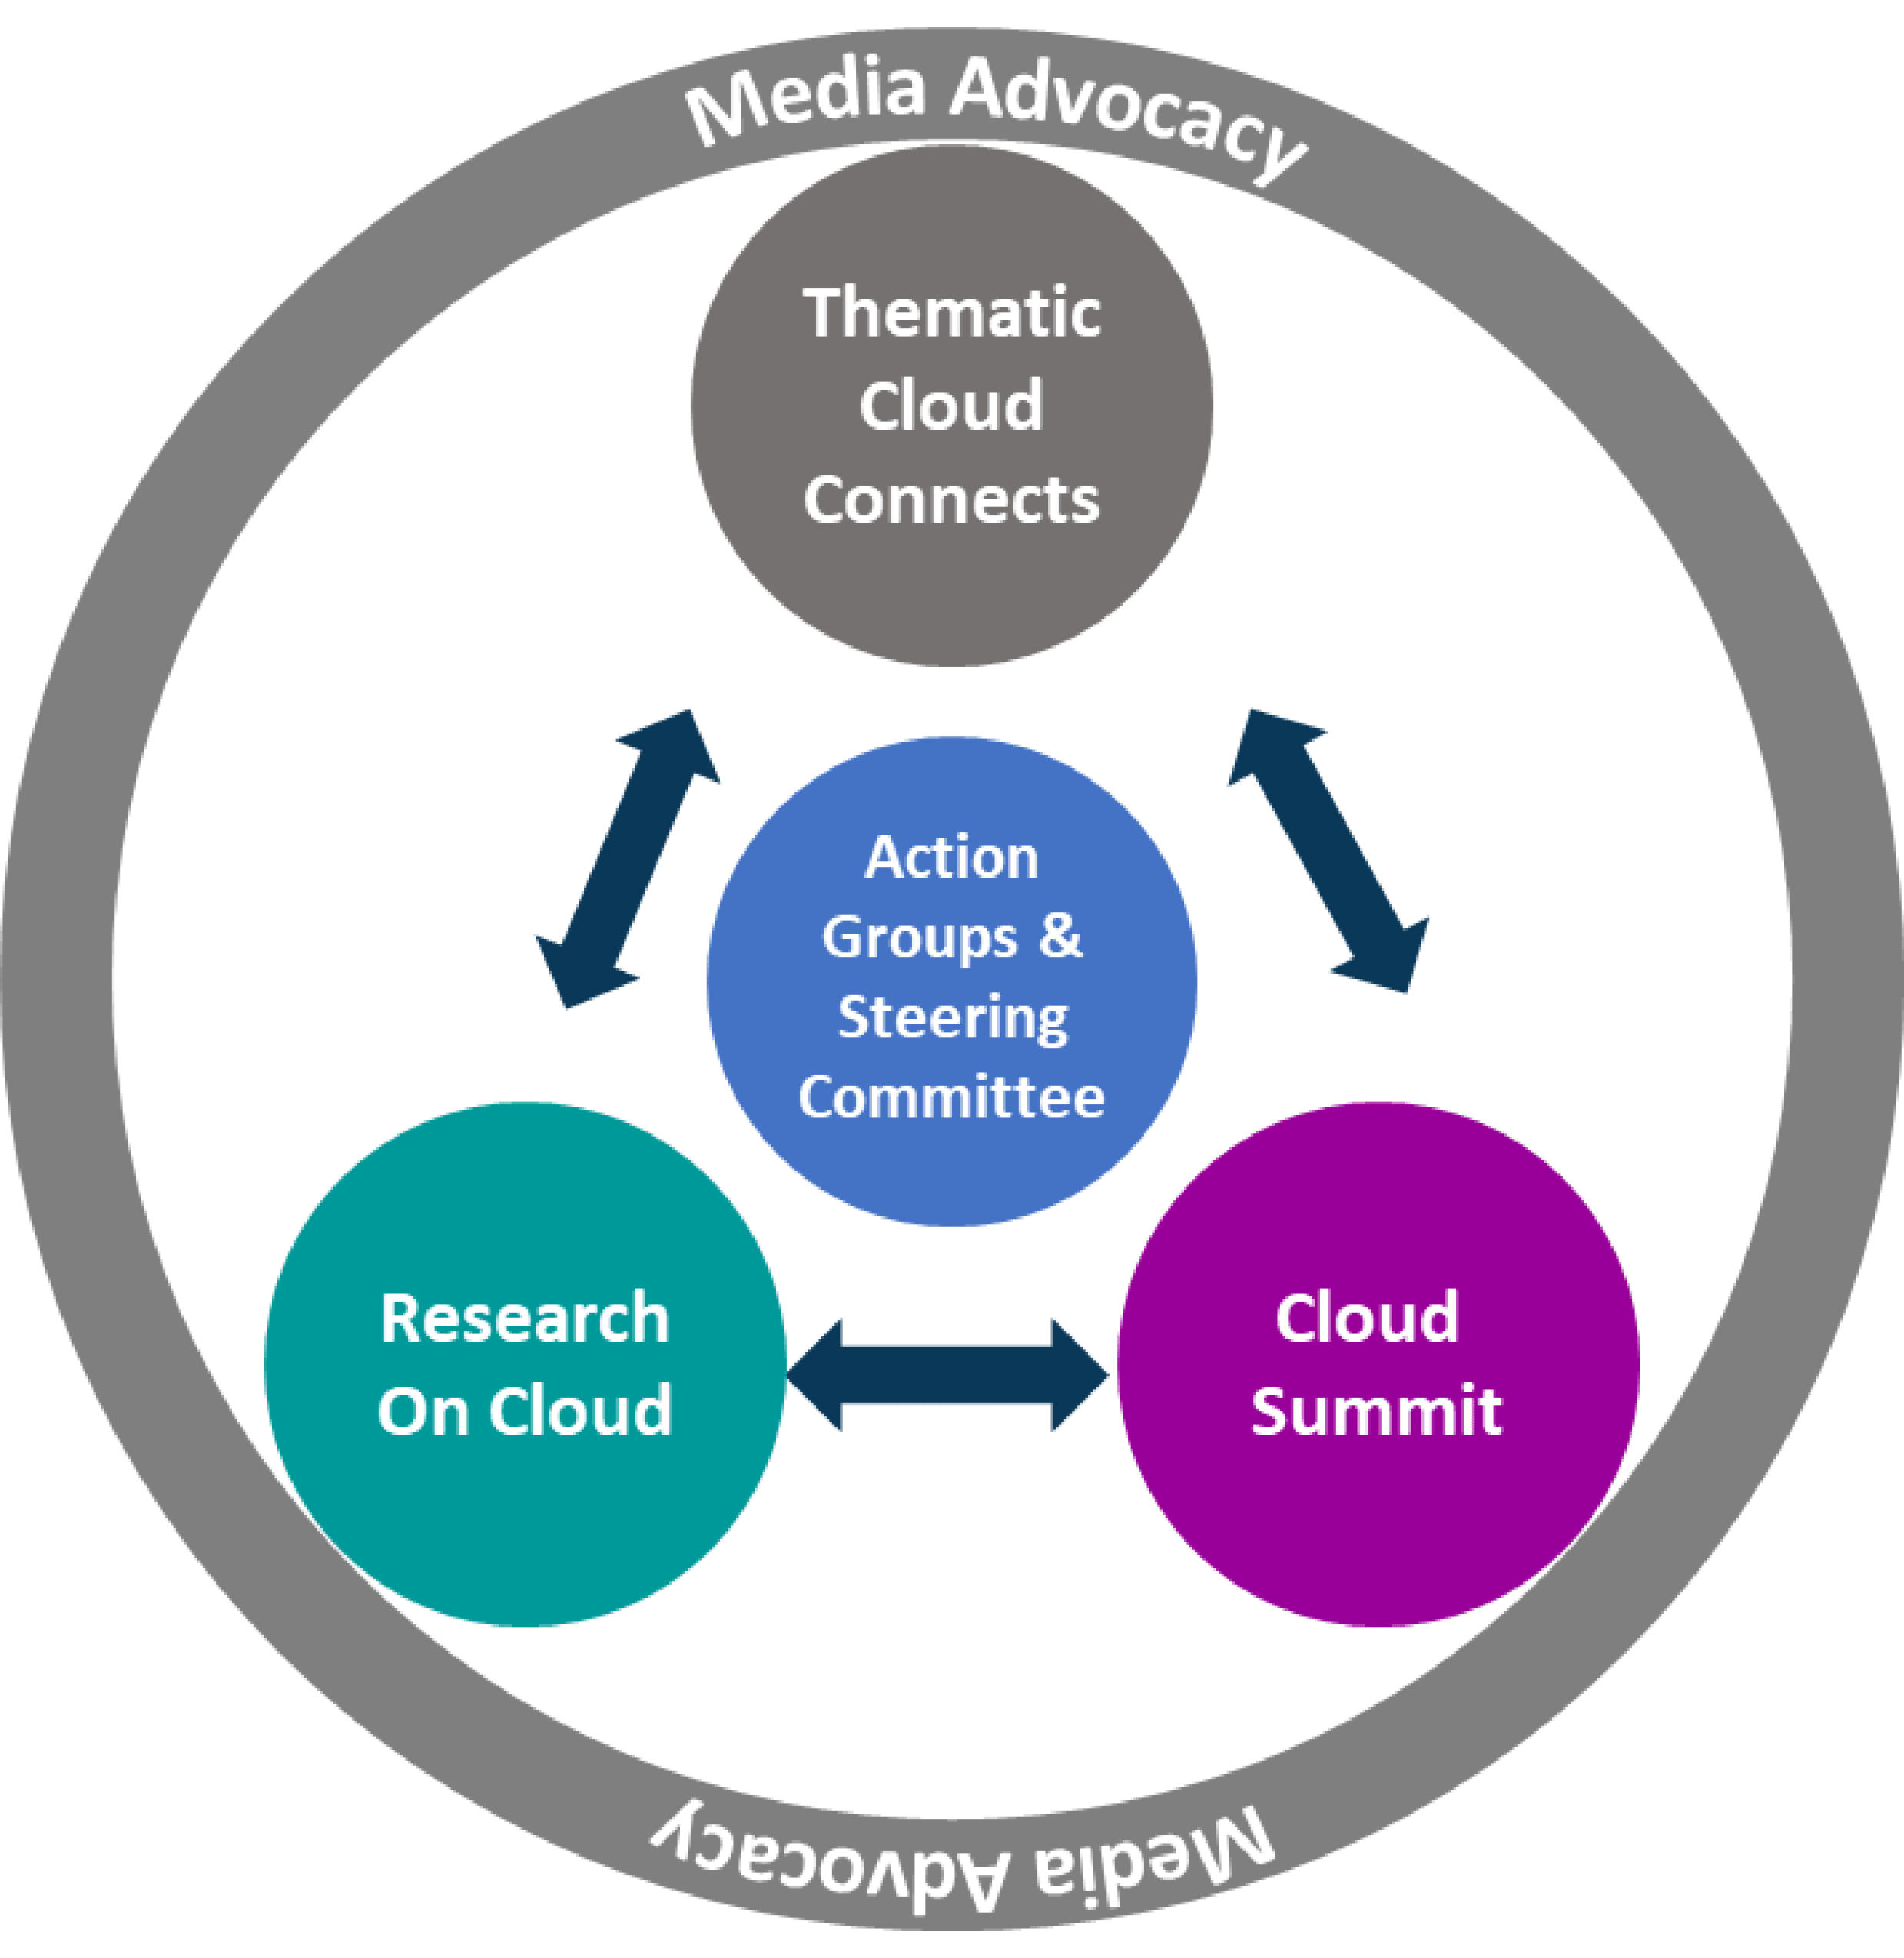 Media Advocacy | Thematic Cloud Connects | Research On Cloud | Cloud Summit | Action Groups & Steering Committee